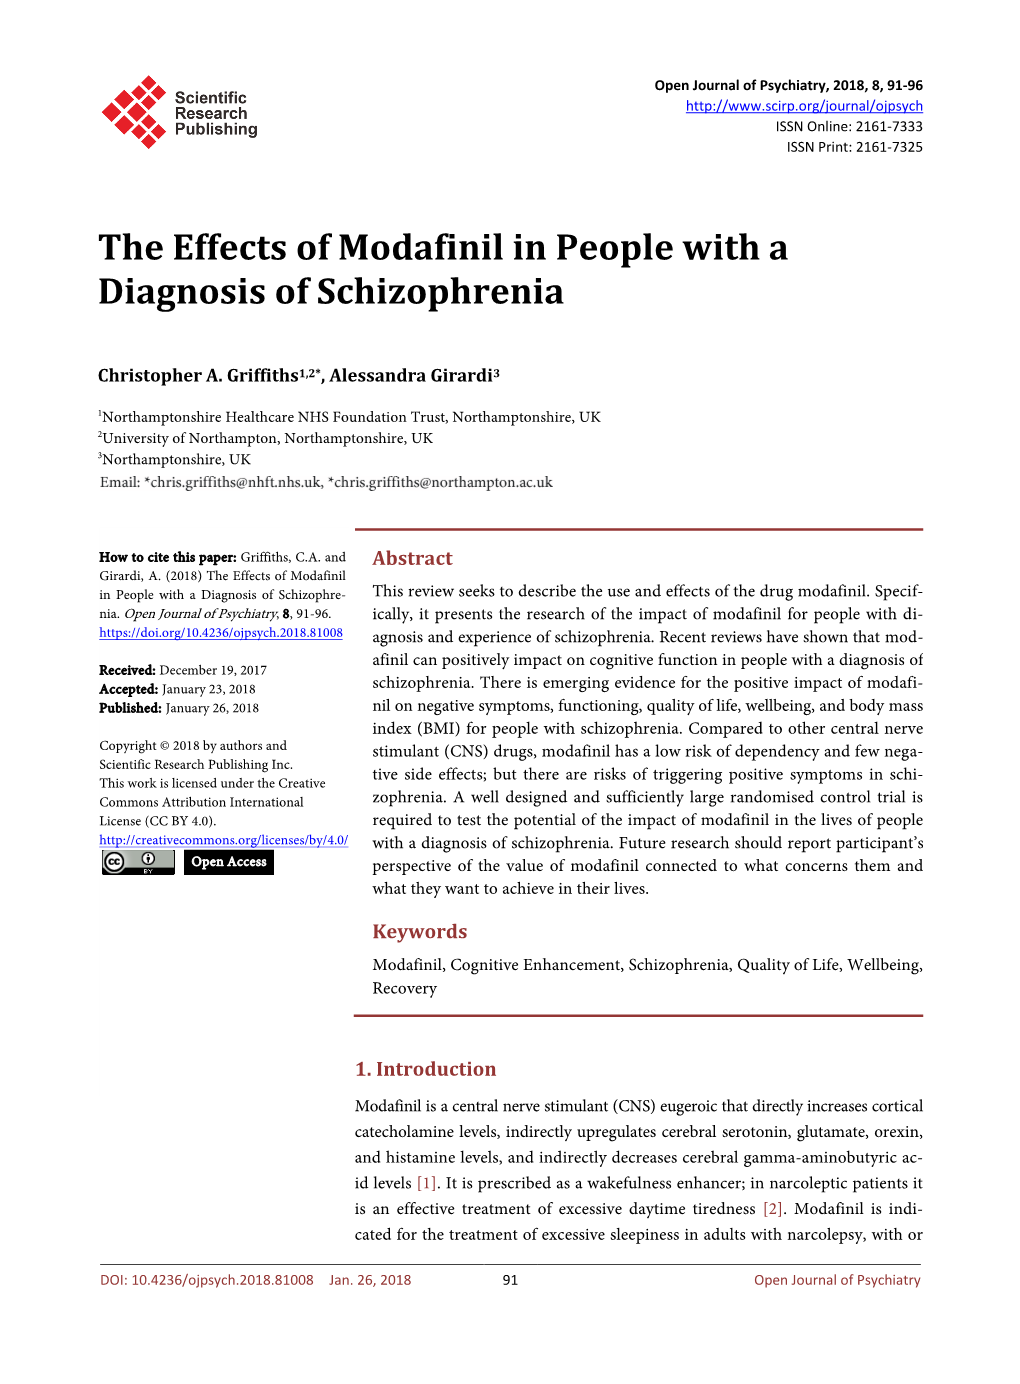 The Effects of Modafinil in People with a Diagnosis of Schizophrenia